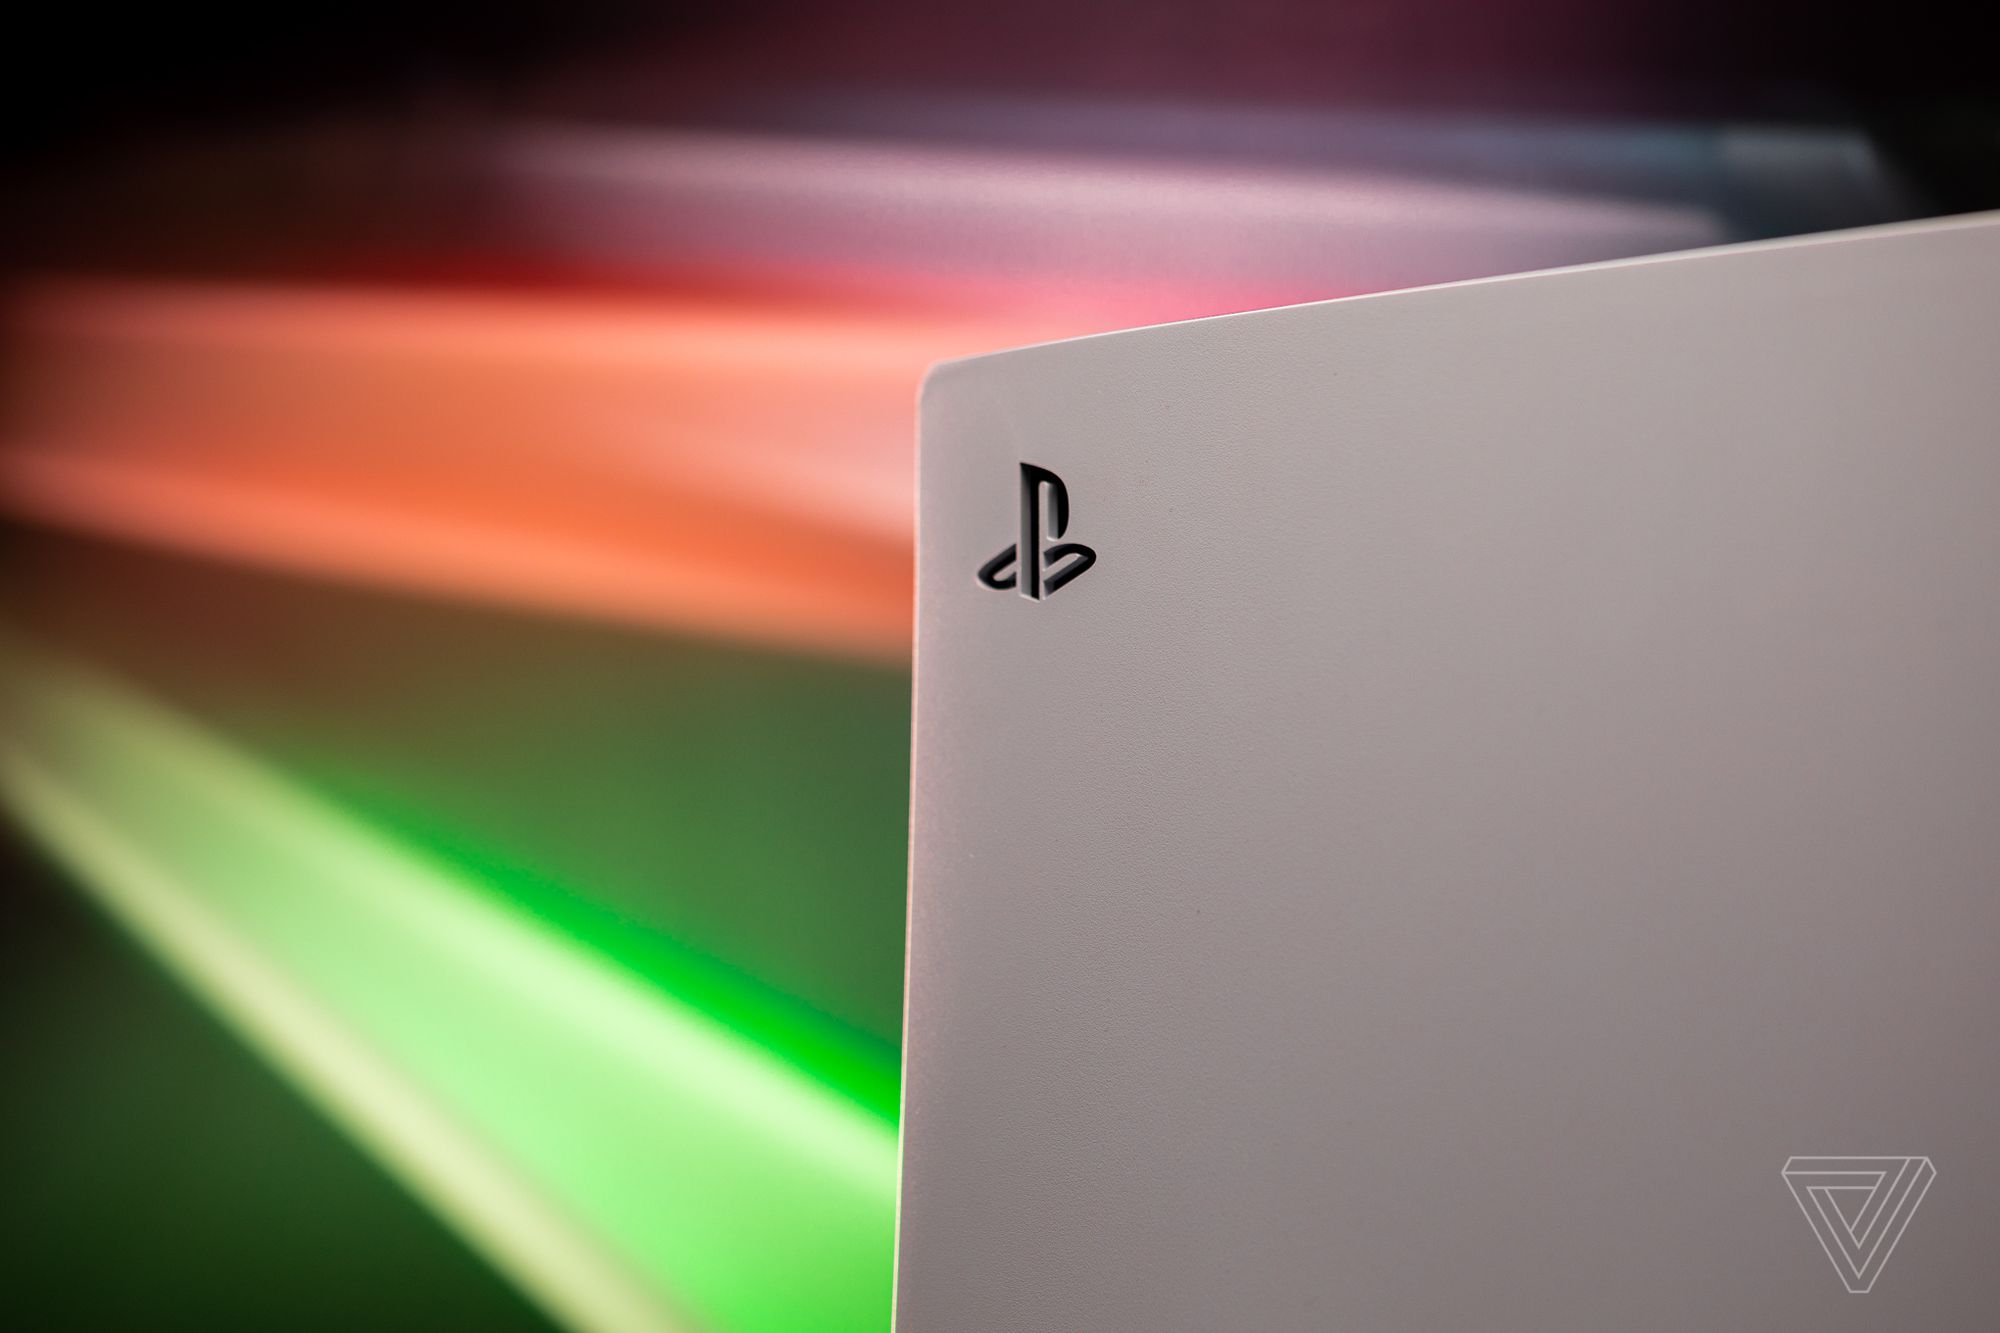 PlayStation Network experienced an that caused problems for PS4 and PS5 owners - The